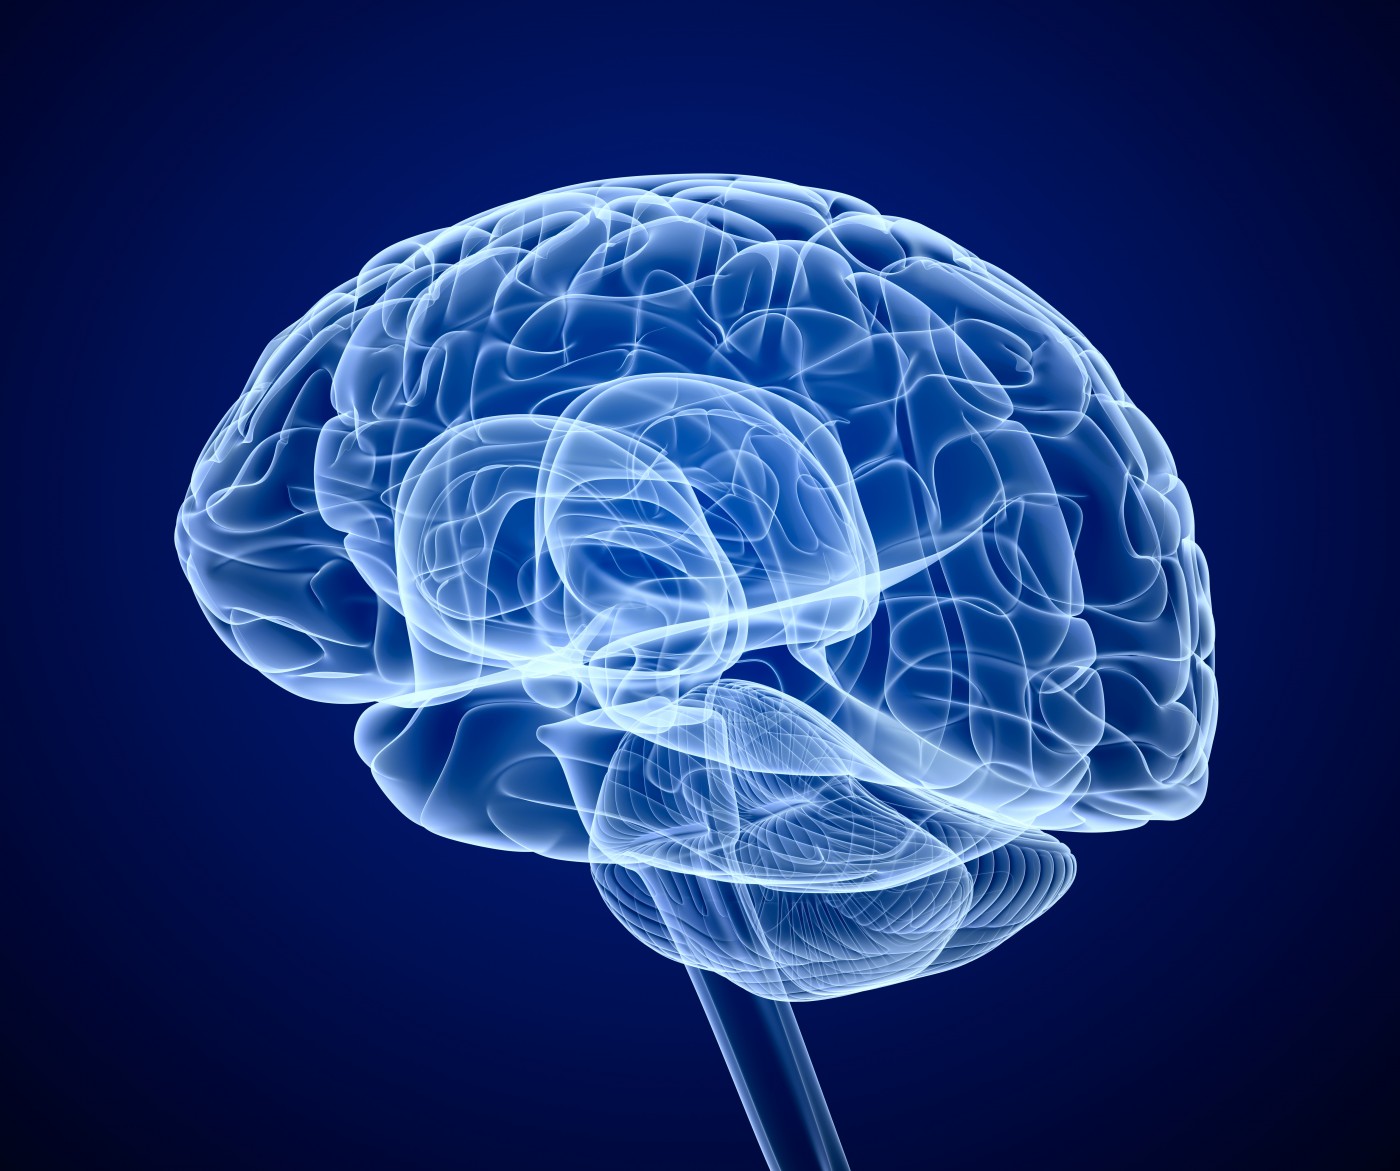 Aubagio (Teriflunomide) Slows Brain Atrophy in Patients with Relapsing